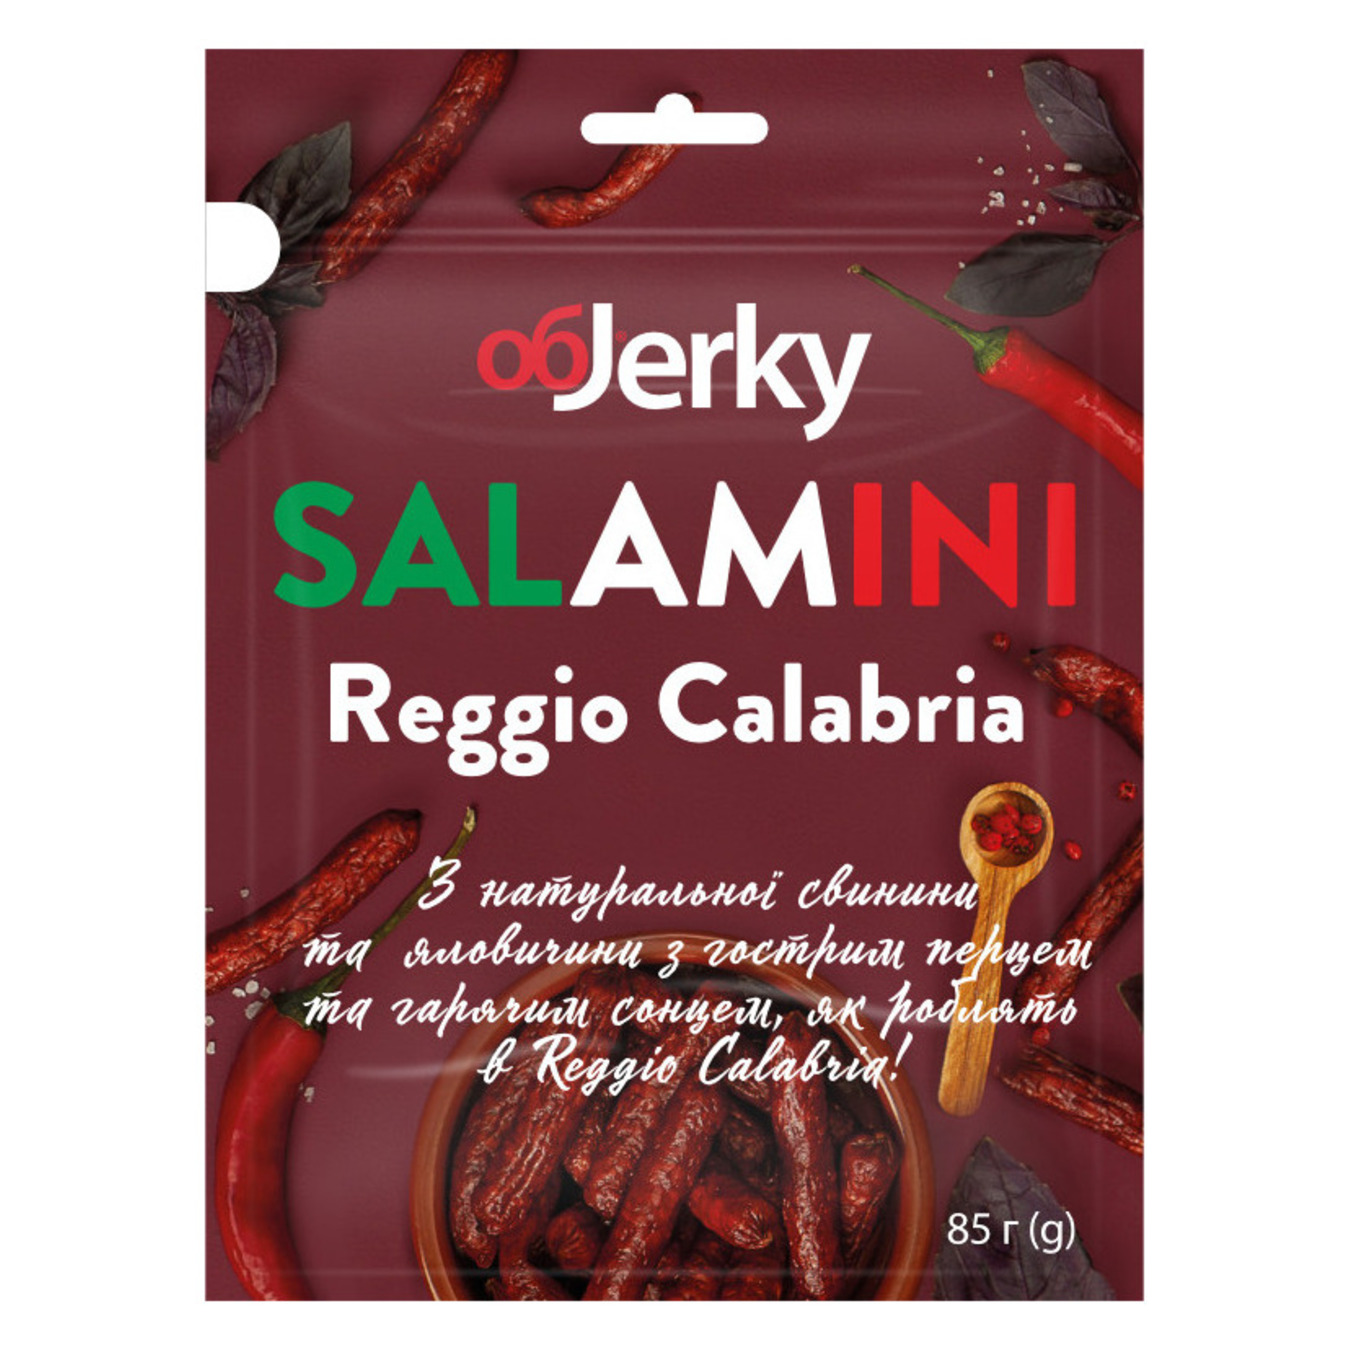 ObJerky Sausages cheese-cured salami calabria 85g